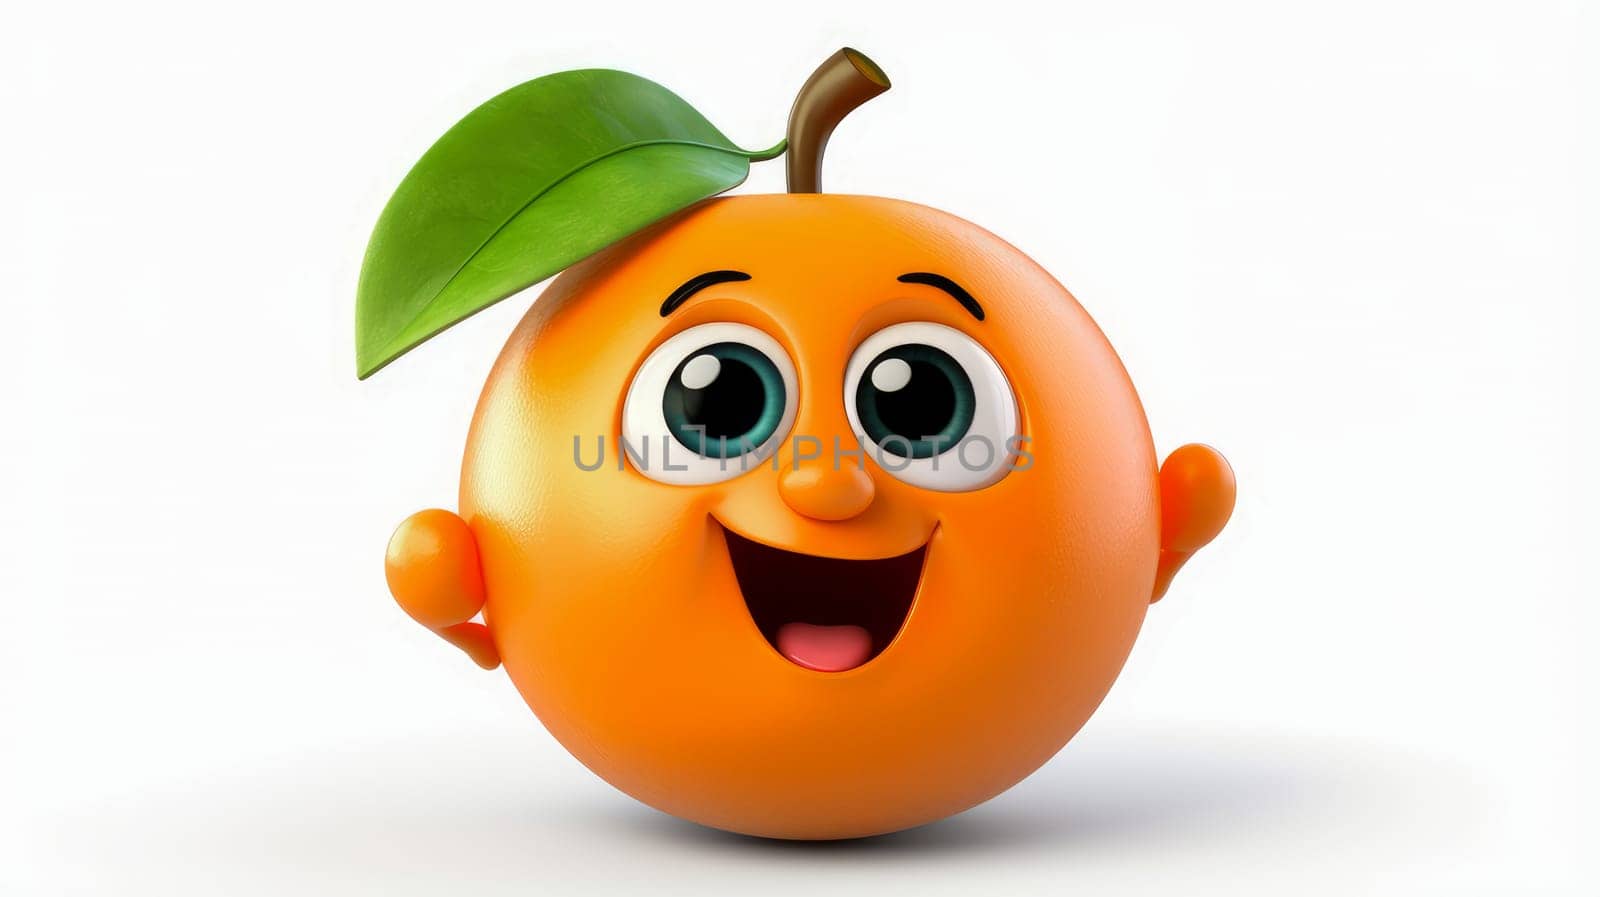 Orange Apricot with a cheerful face 3D on a white background. Cartoon characters, three-dimensional character, healthy lifestyle, proper nutrition, diet, fresh vegetables and fruits, vegetarianism, veganism, food, breakfast, fun, laughter, banner